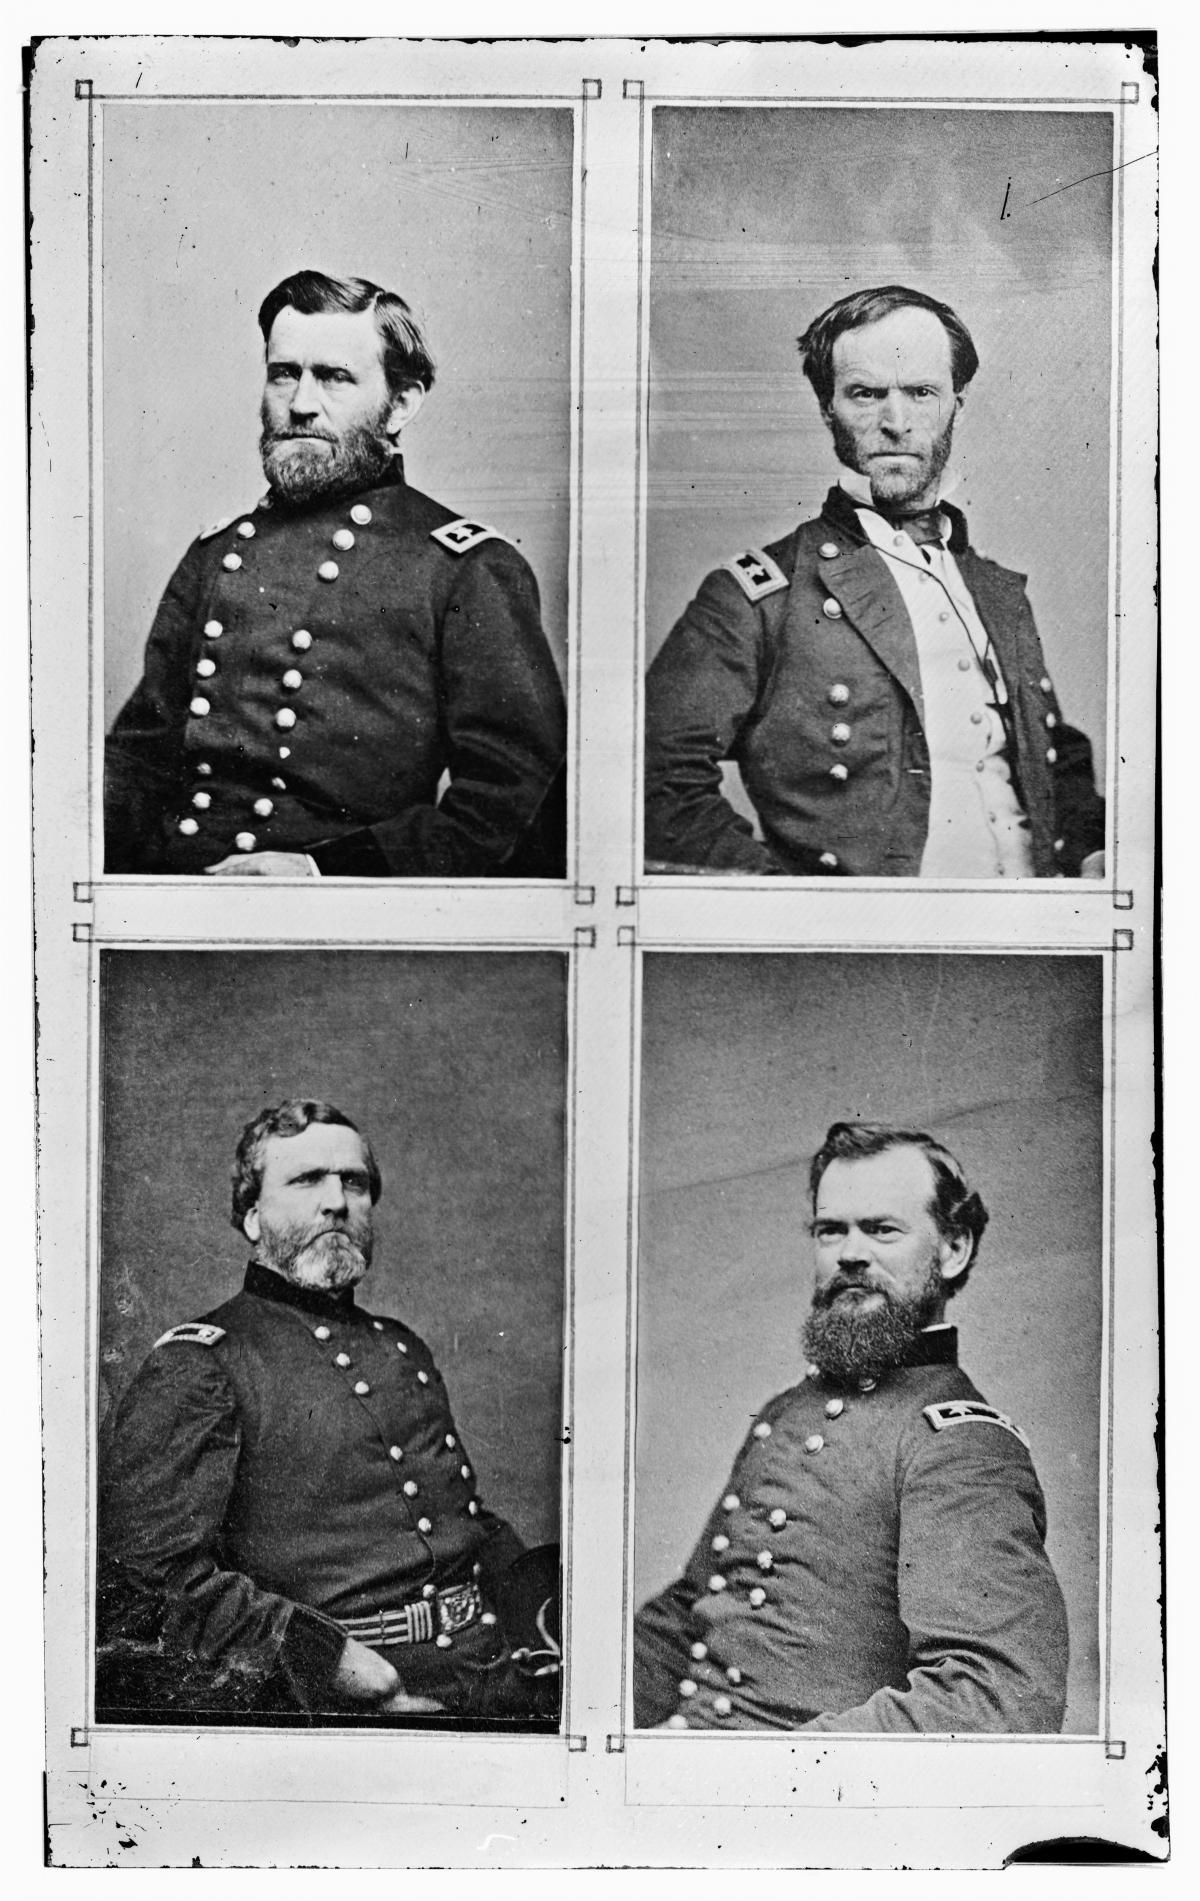 Union generals photographed by Mathew Brady: (clockwise from top left) Ulysses S. Grant, William T. Sherman, James B. McPherson, and George H. Thomas